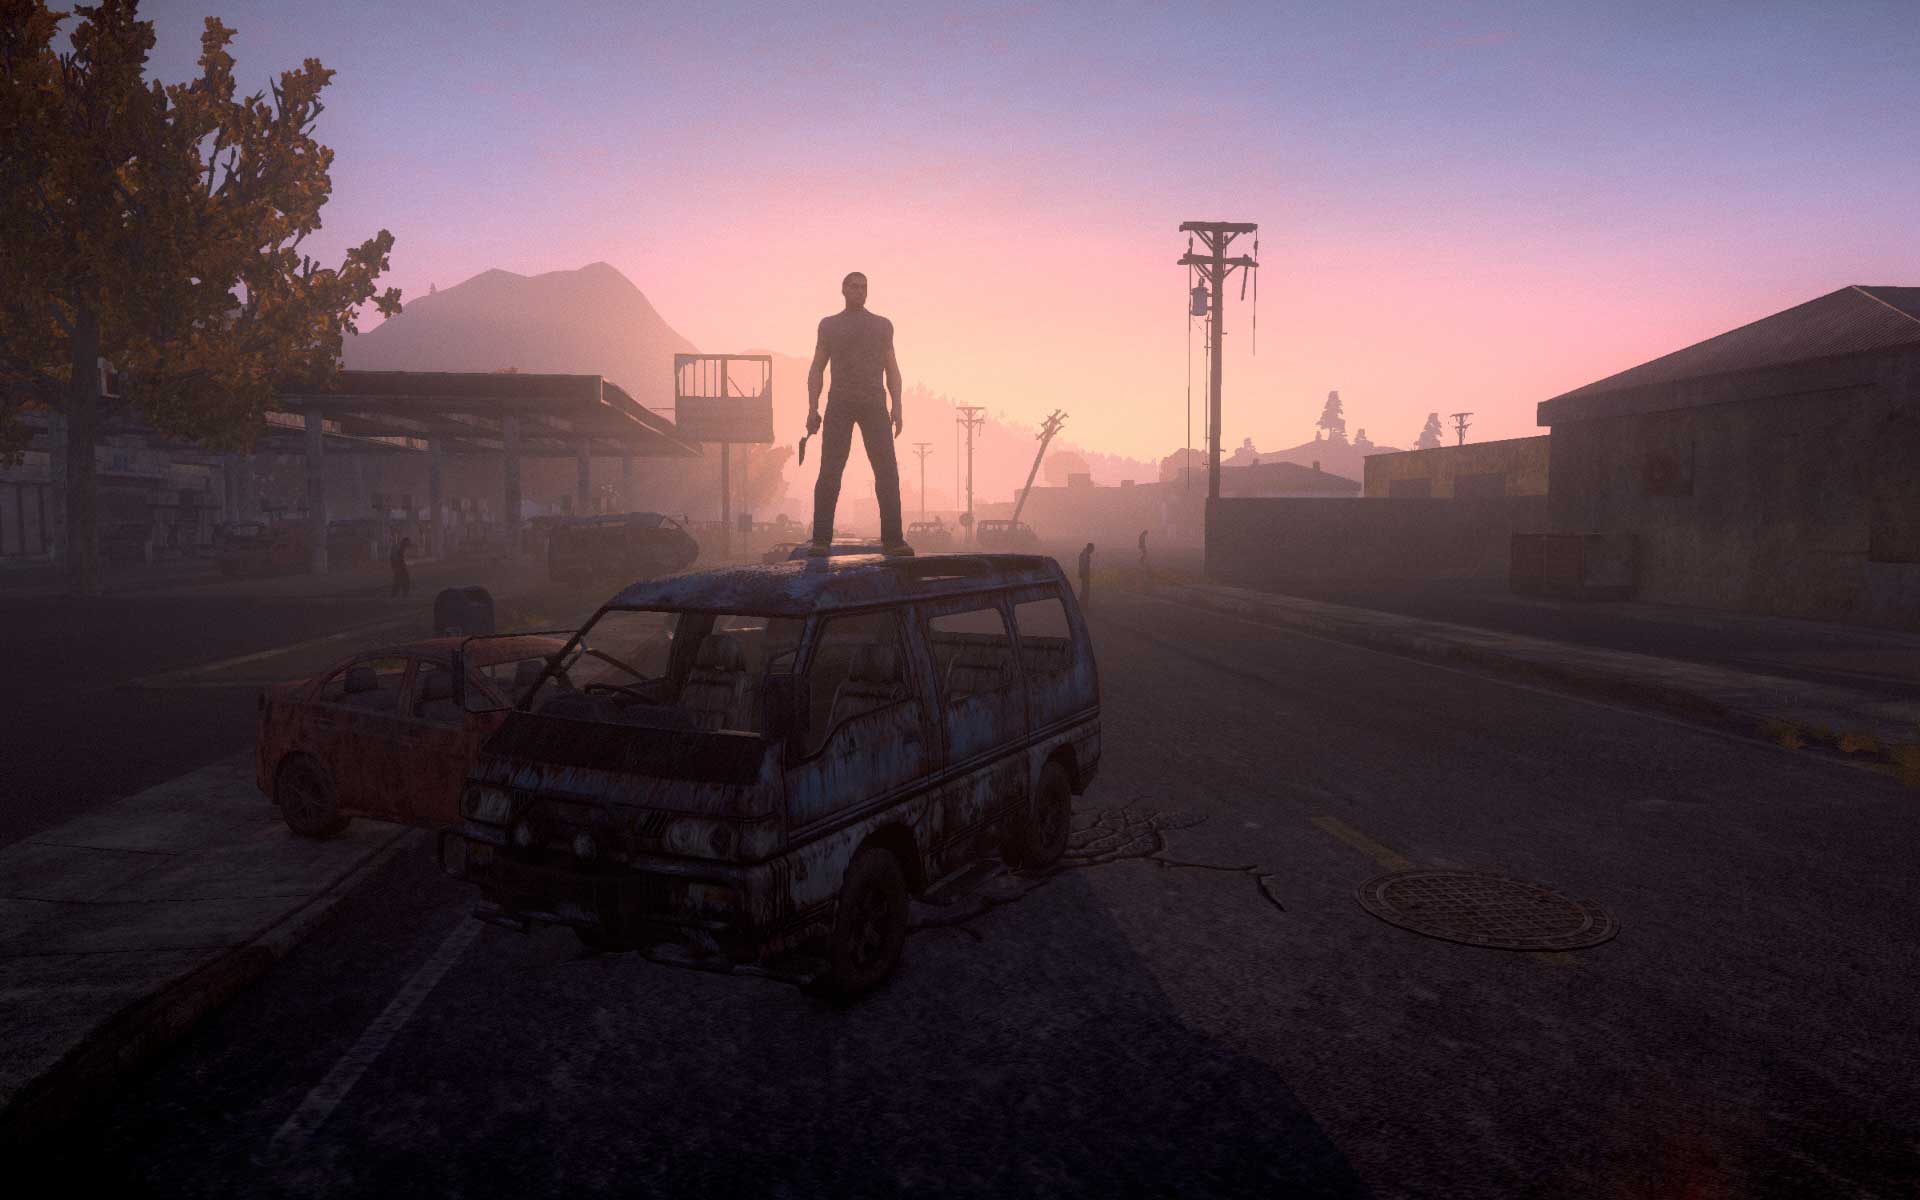 Image for H1Z1 monetisation will sell wearables, but not ammo, guns or food, says Smedley